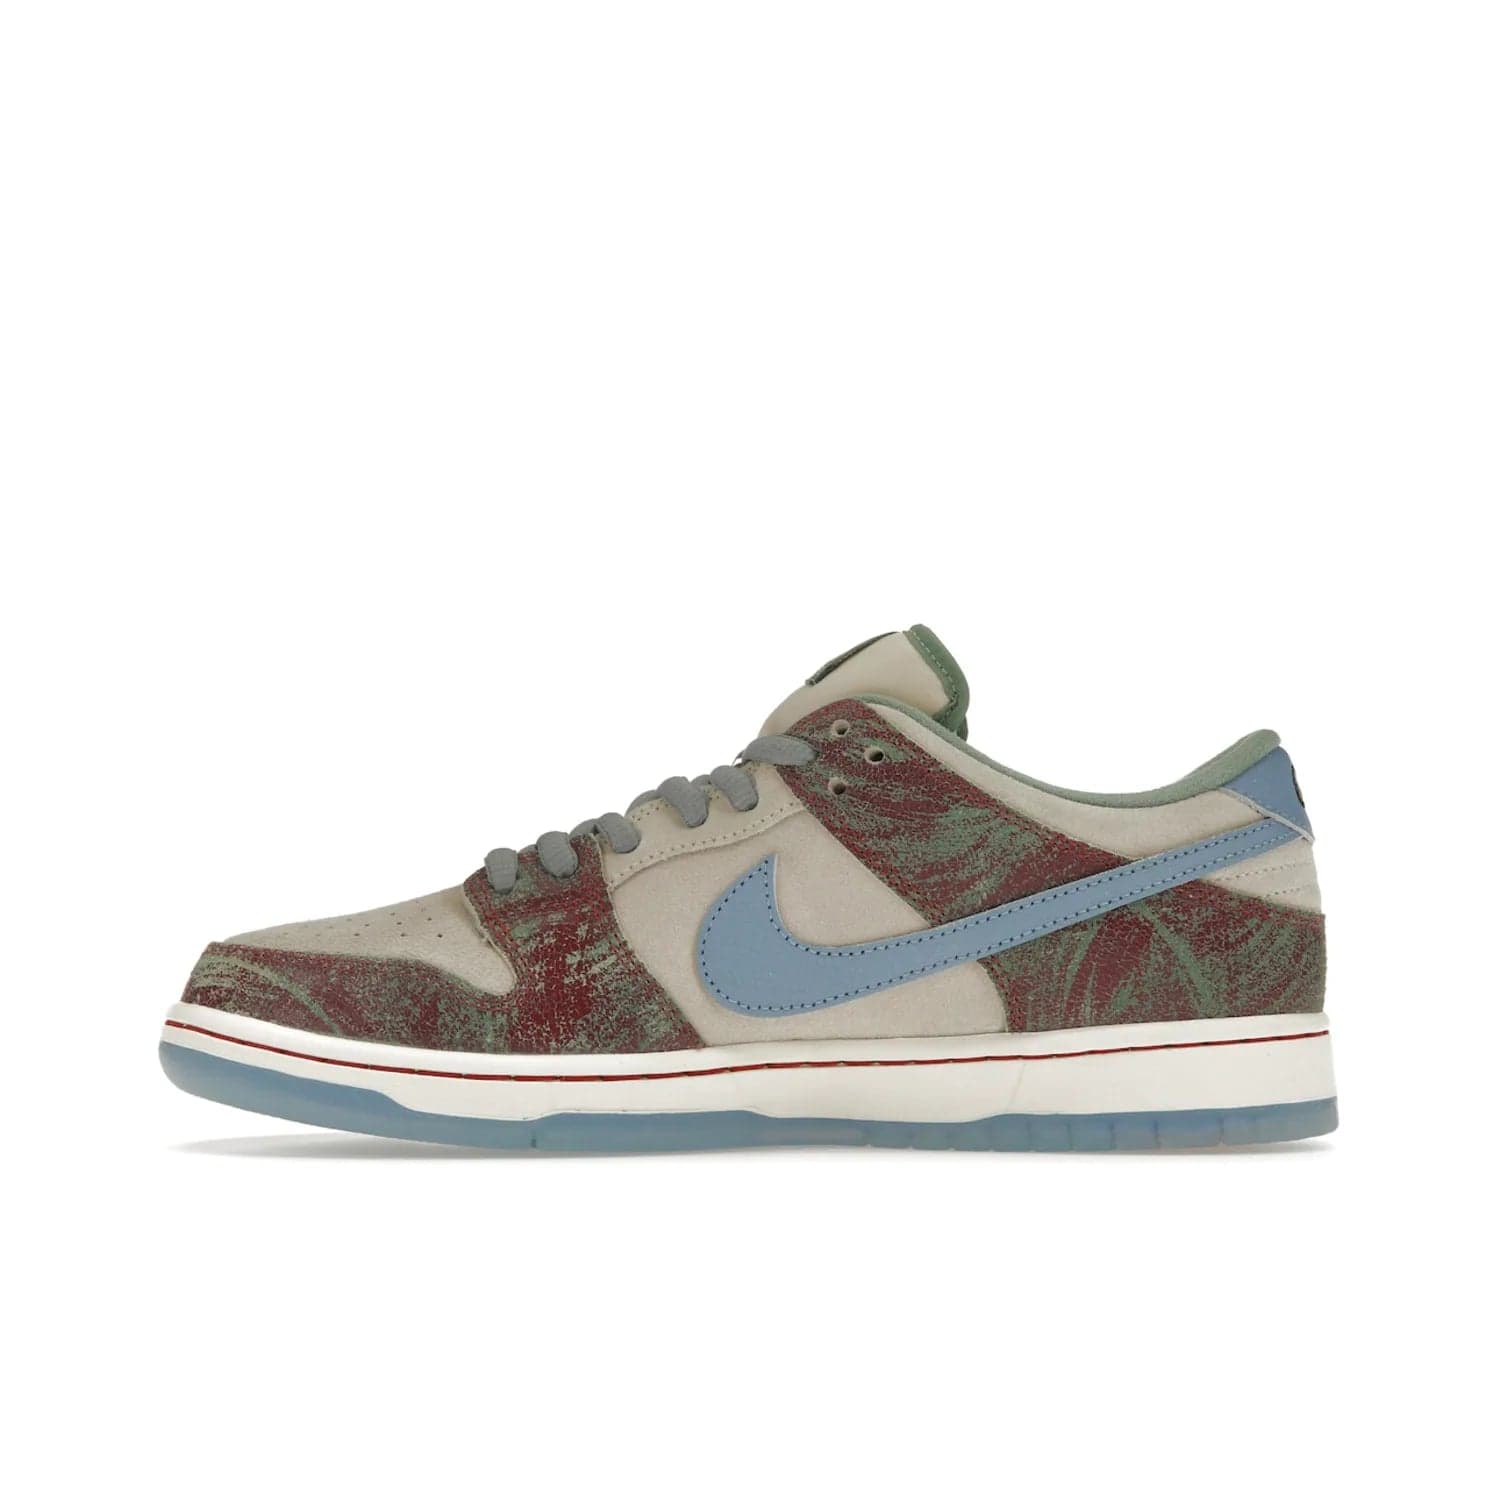 Nike SB Dunk Low Crenshaw Skate Club - Image 19 - Only at www.BallersClubKickz.com - Introducing the Nike SB Dunk Low Crenshaw Skate Club! Classic skate shoes with Sail and Light Blue upper, Cedar accents, padded collars and superior grip for comfortable, stable performance and style. Ideal for any skate session.